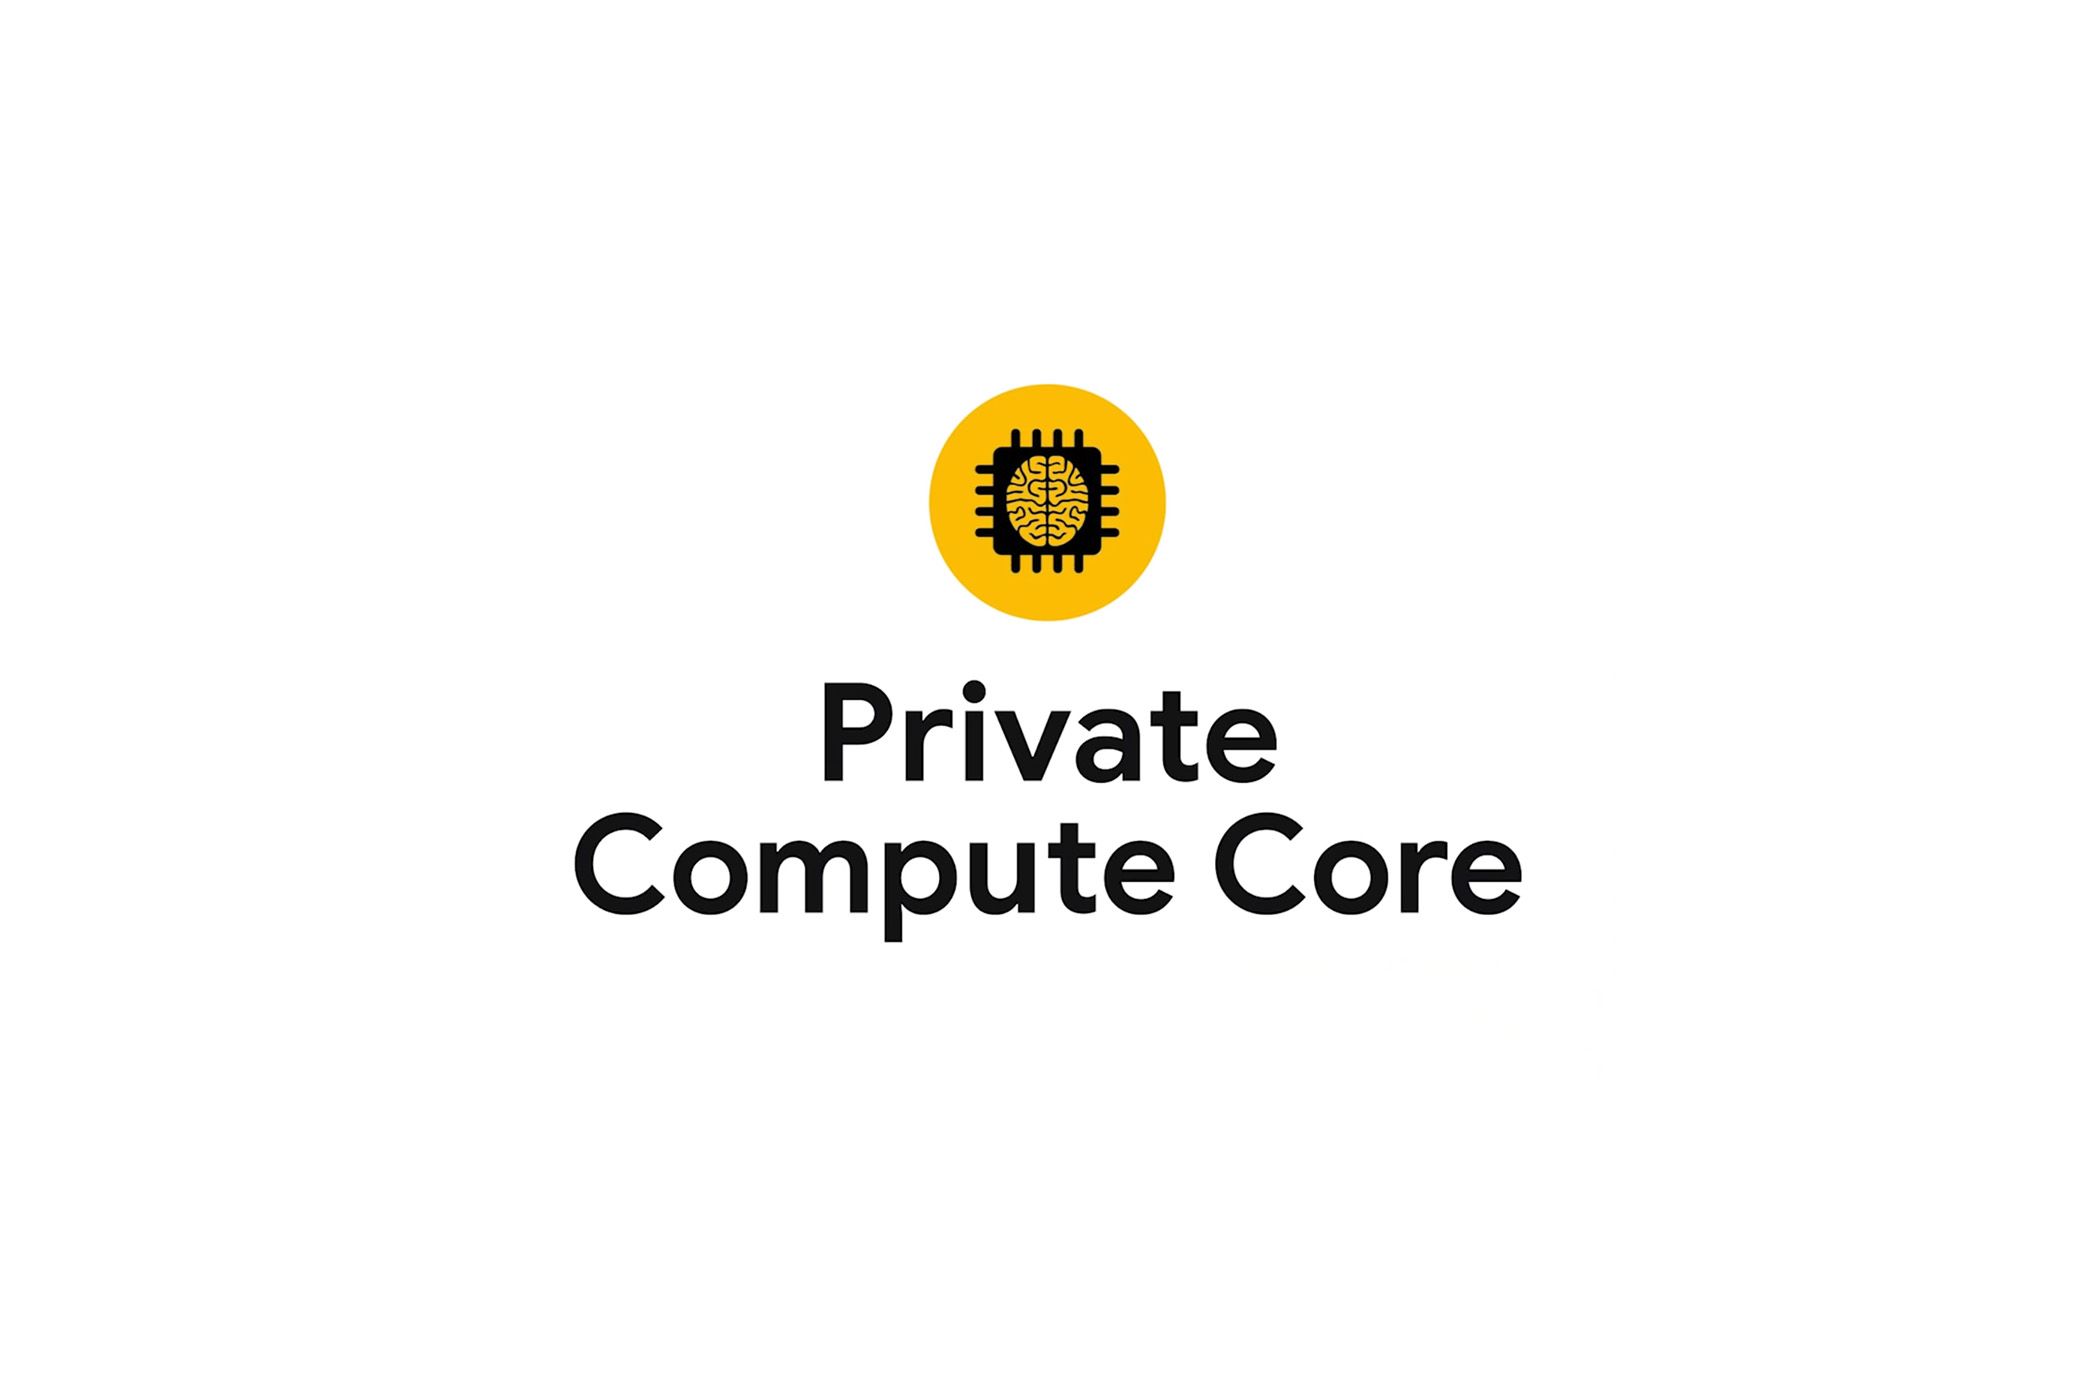 Text saying Private Compute Core on white background with yellow logo with human brain.